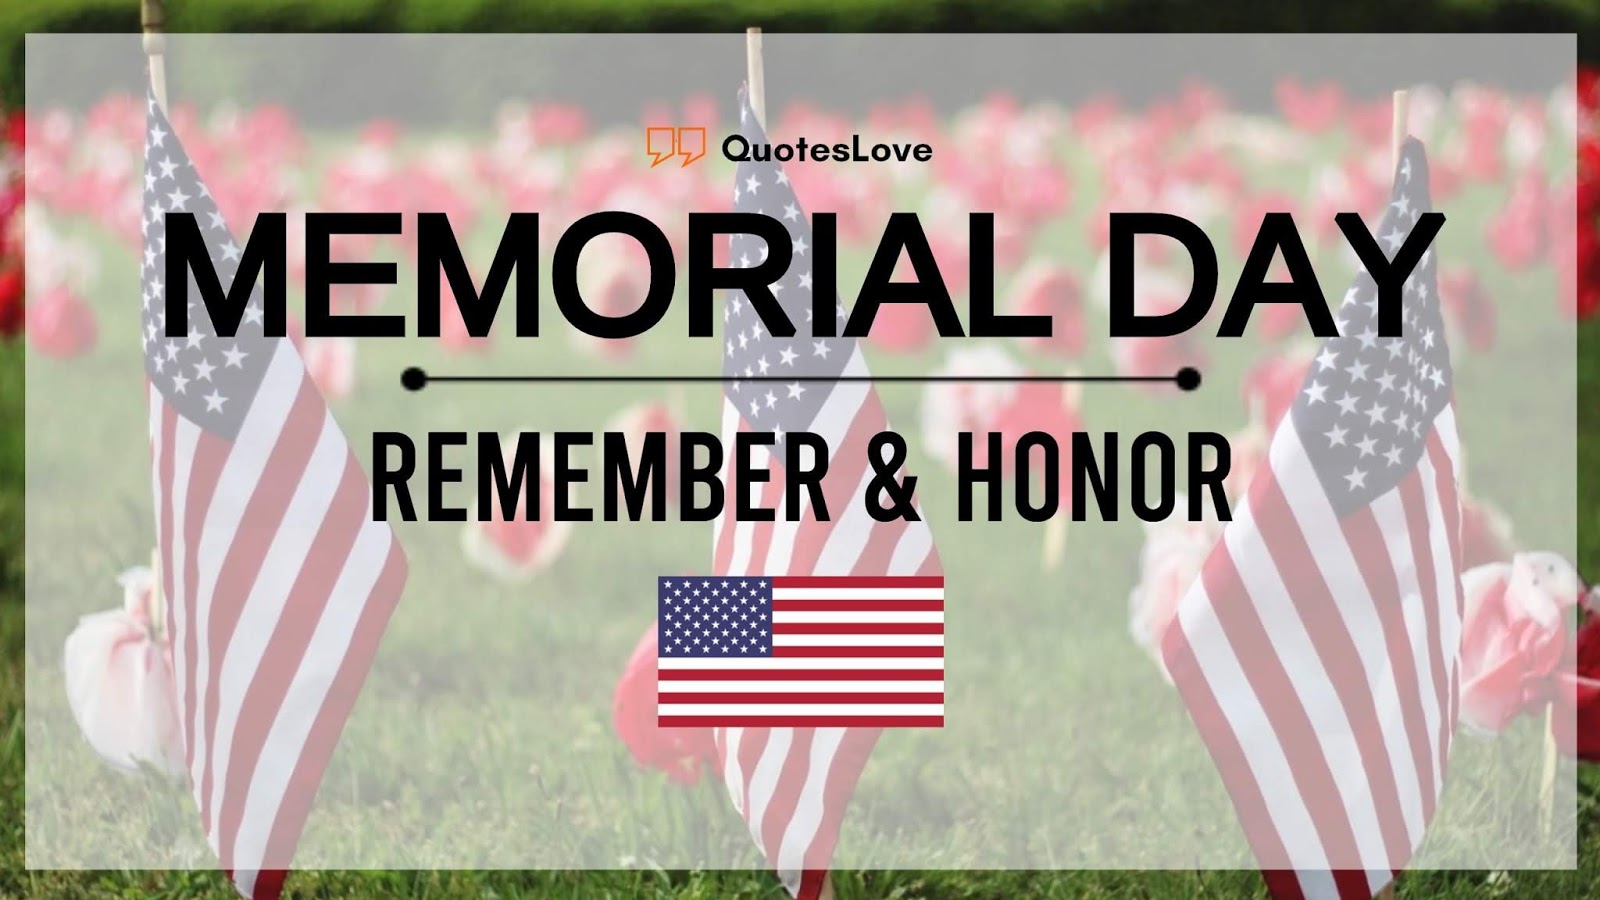 25+ [Best] Memorial Day 2022: Wishes, Greetings, Messages, Image, Pictures, Photos, Wallpapers